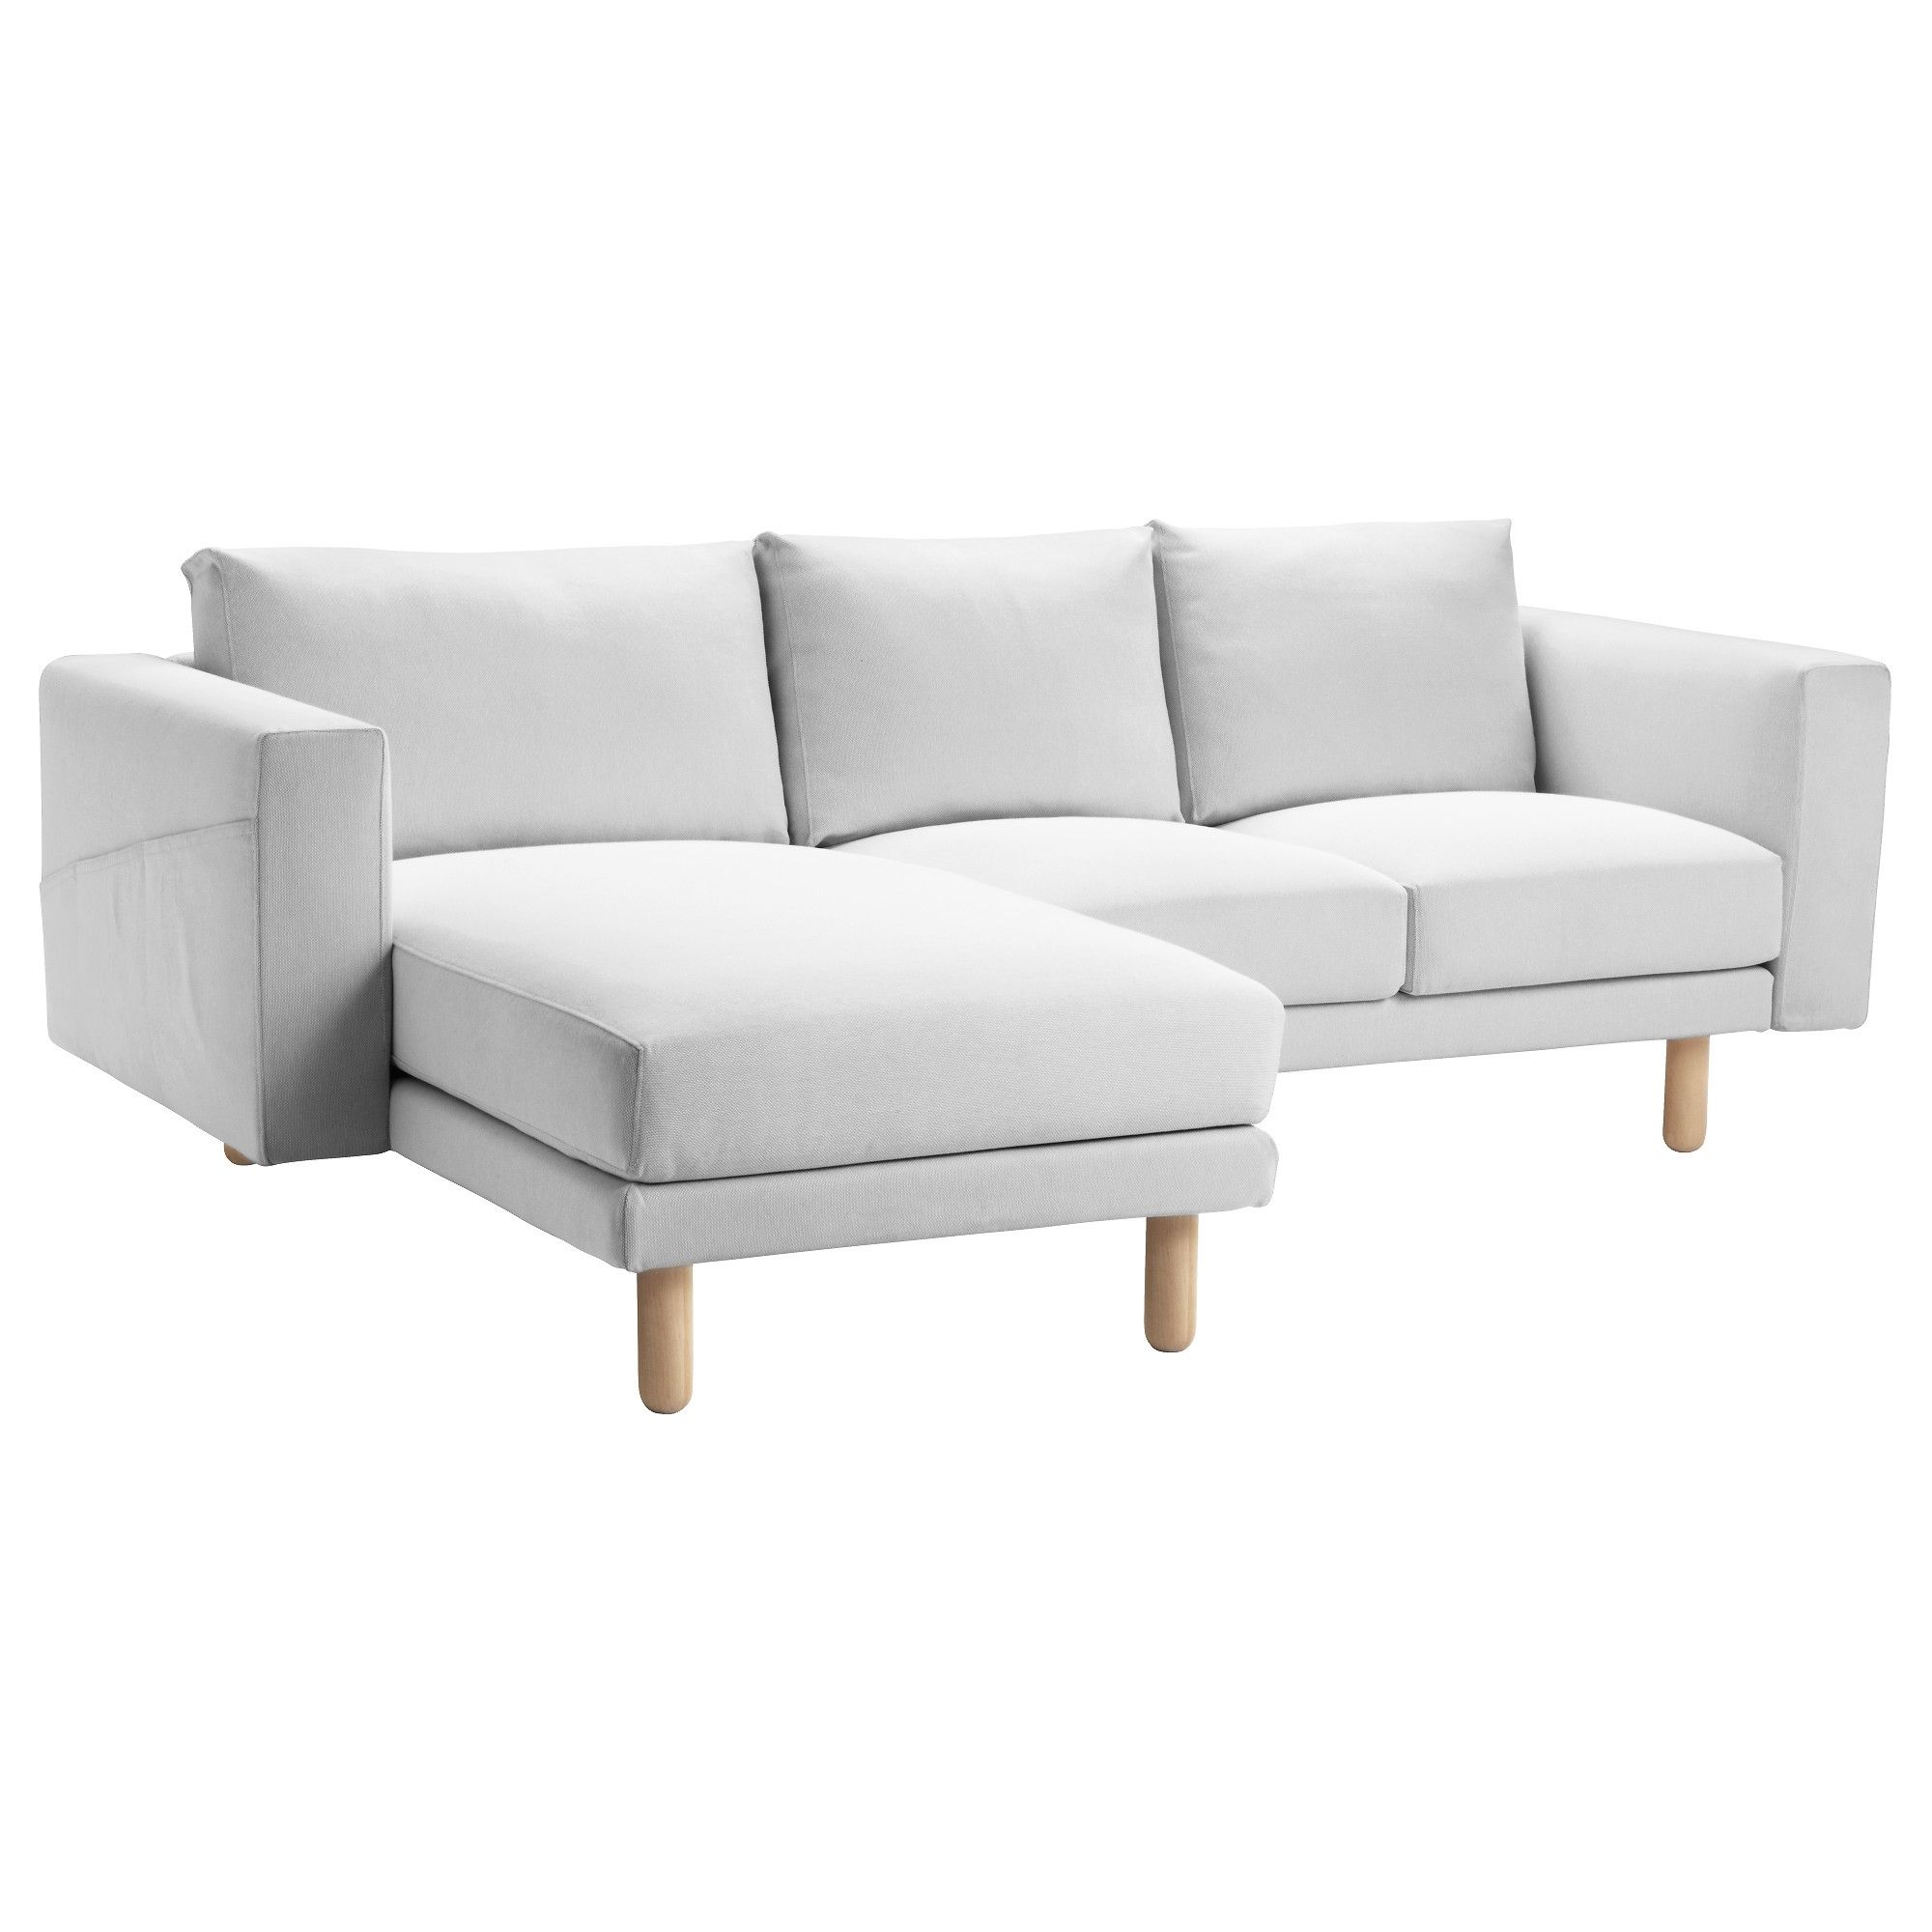 Best And Newest Ikea Chaise Sofas With Norsborg Sectional, 3 Seat – Finnsta White, Birch – Ikea (View 10 of 15)